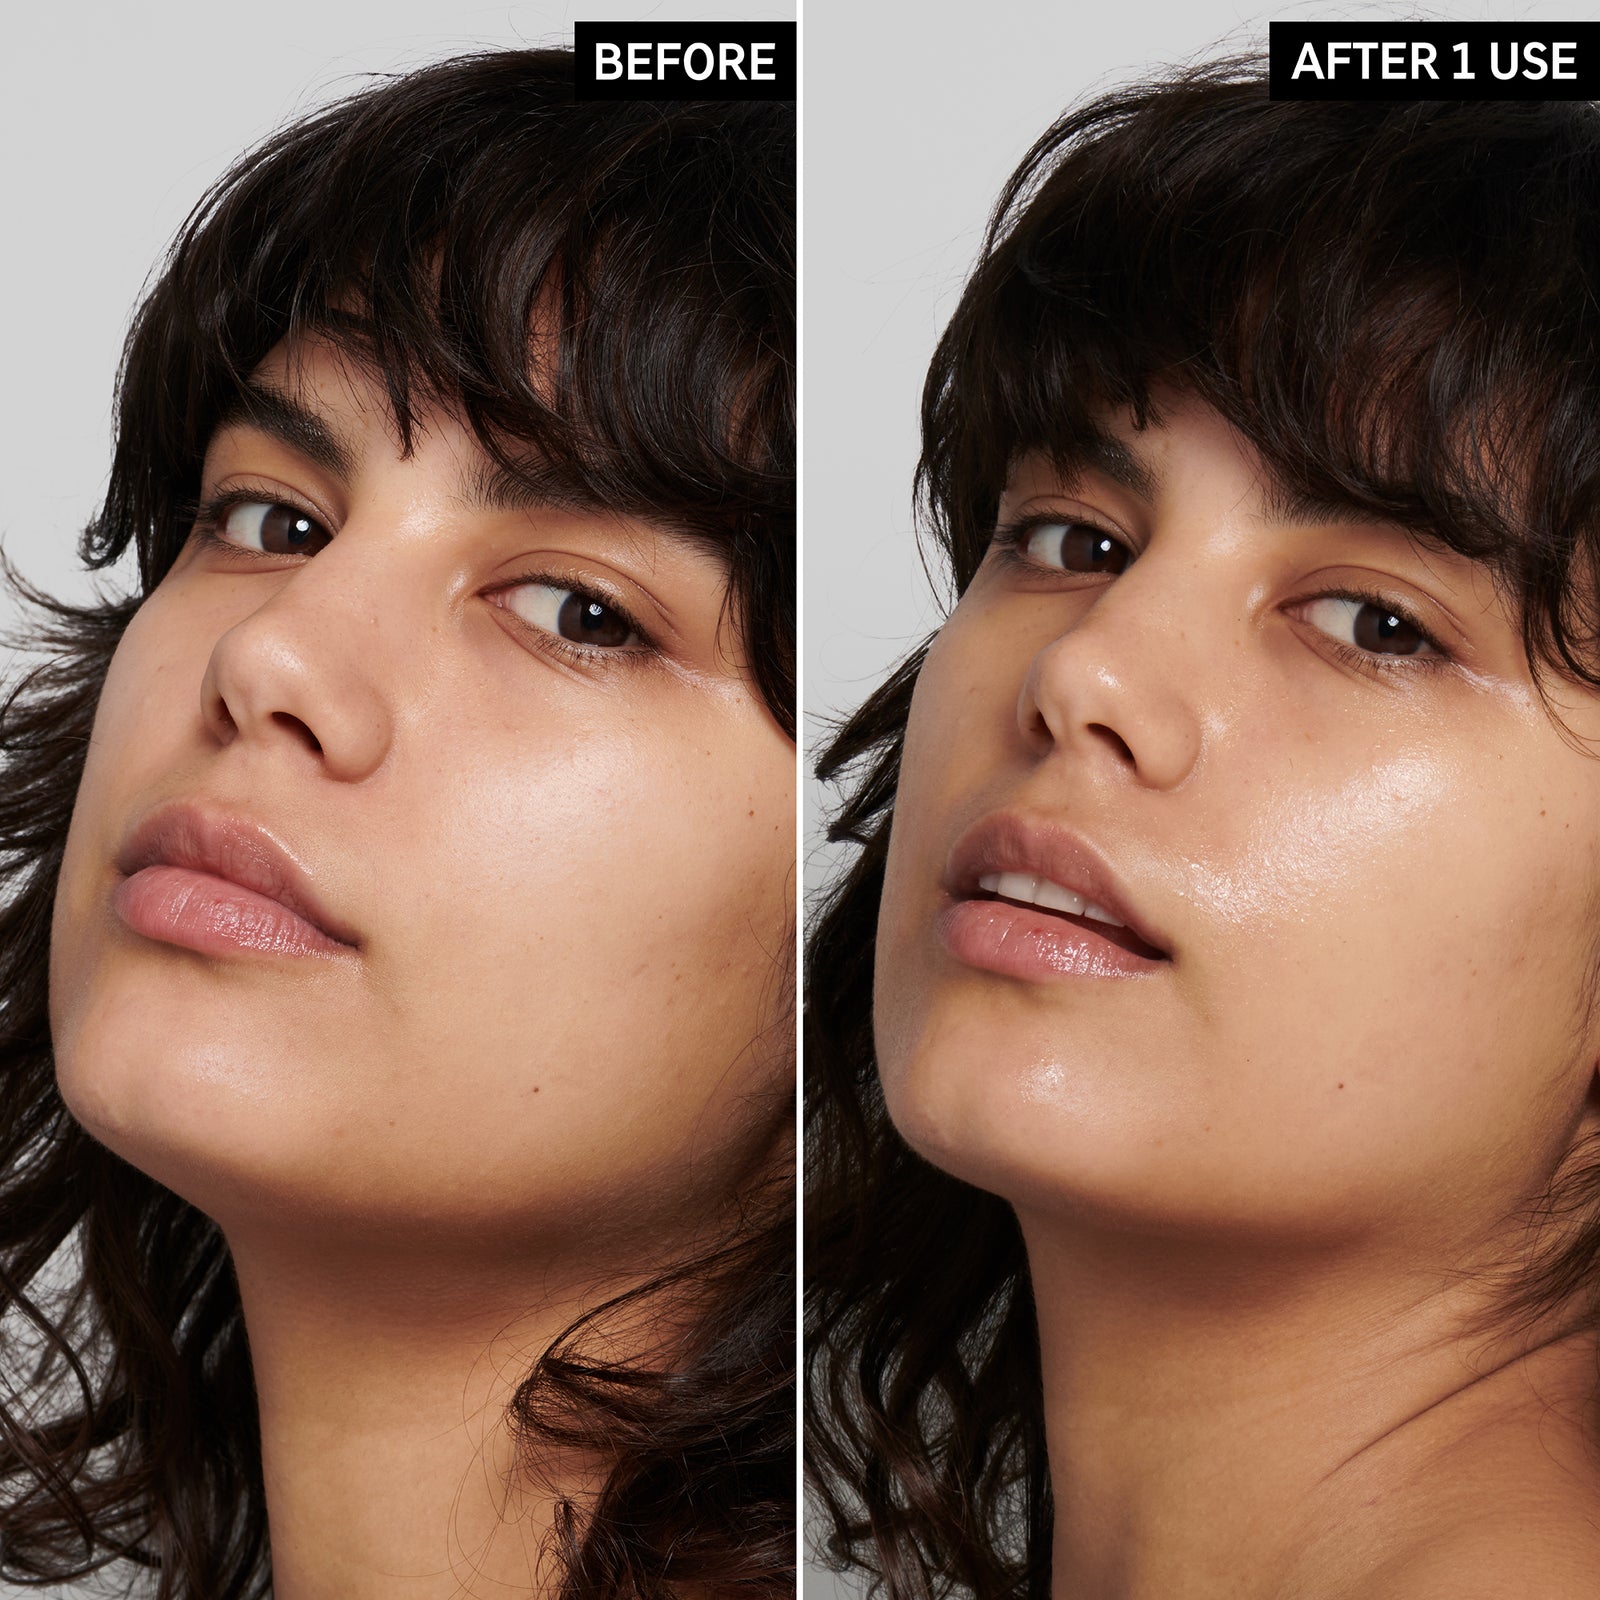 2 images of a model's face side by side to show the before and after using Polyglutamic Acid Serum just once